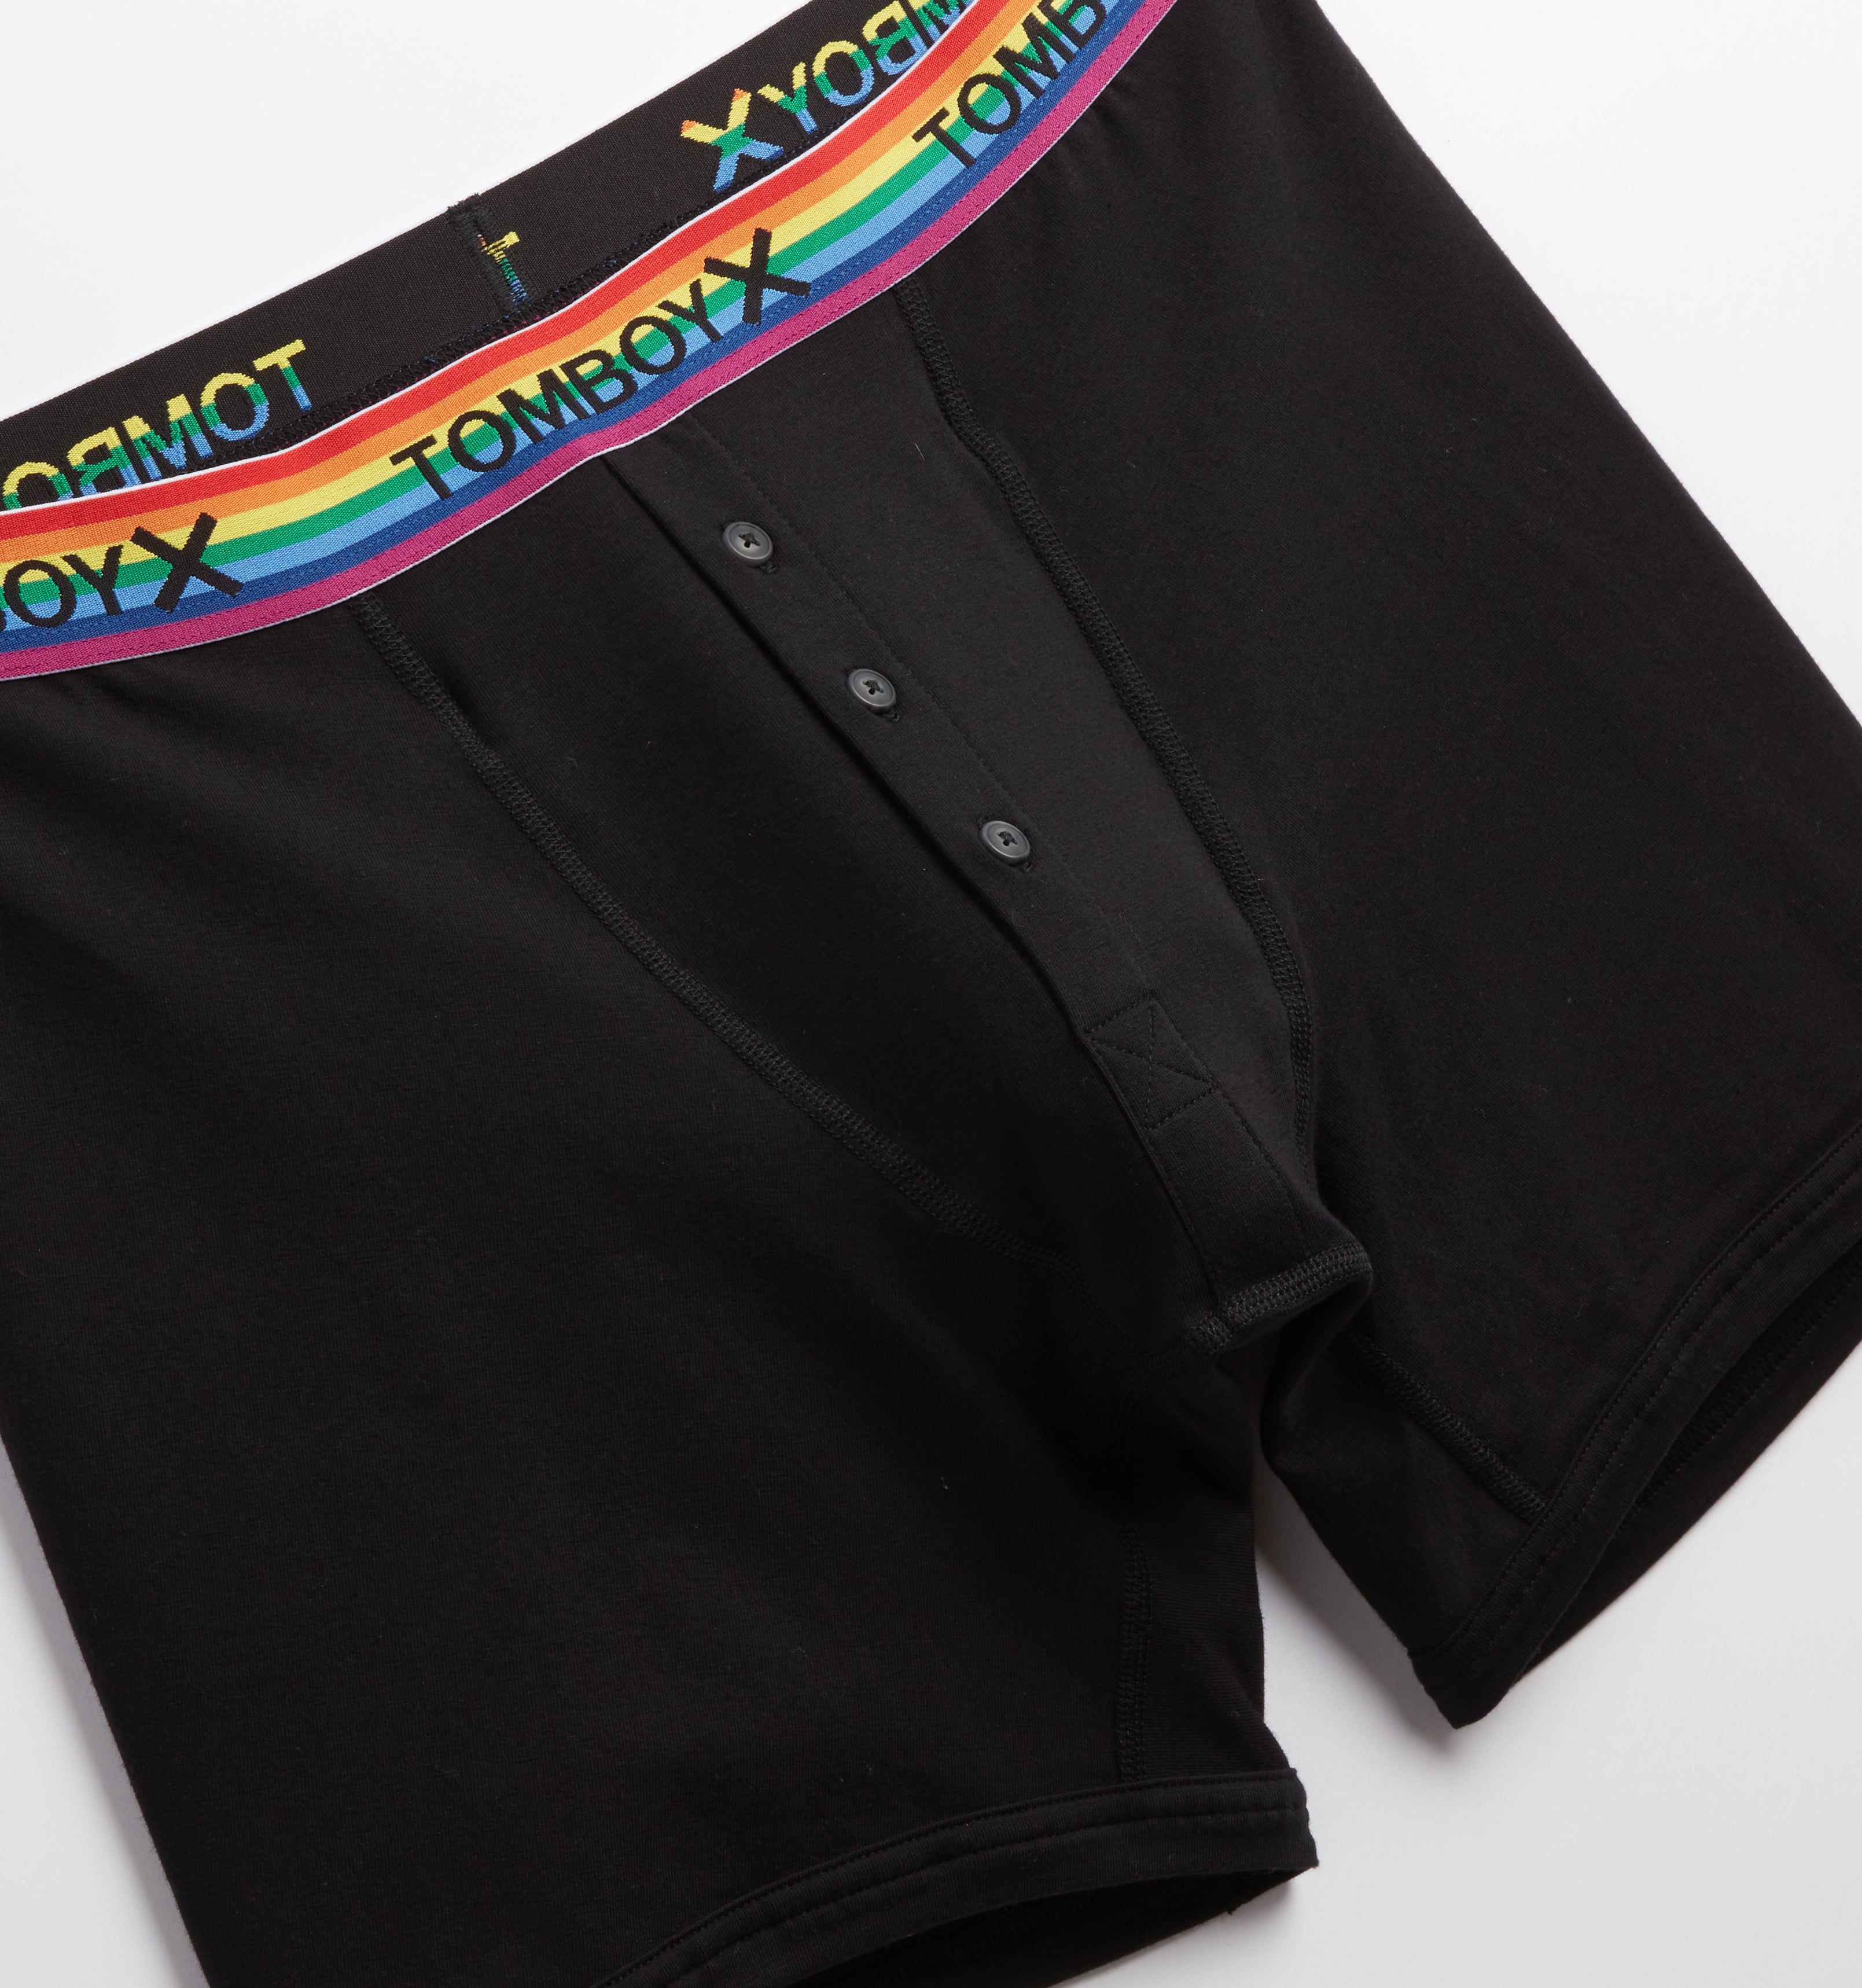 6" Fly Packing Boxer - Black Rainbow